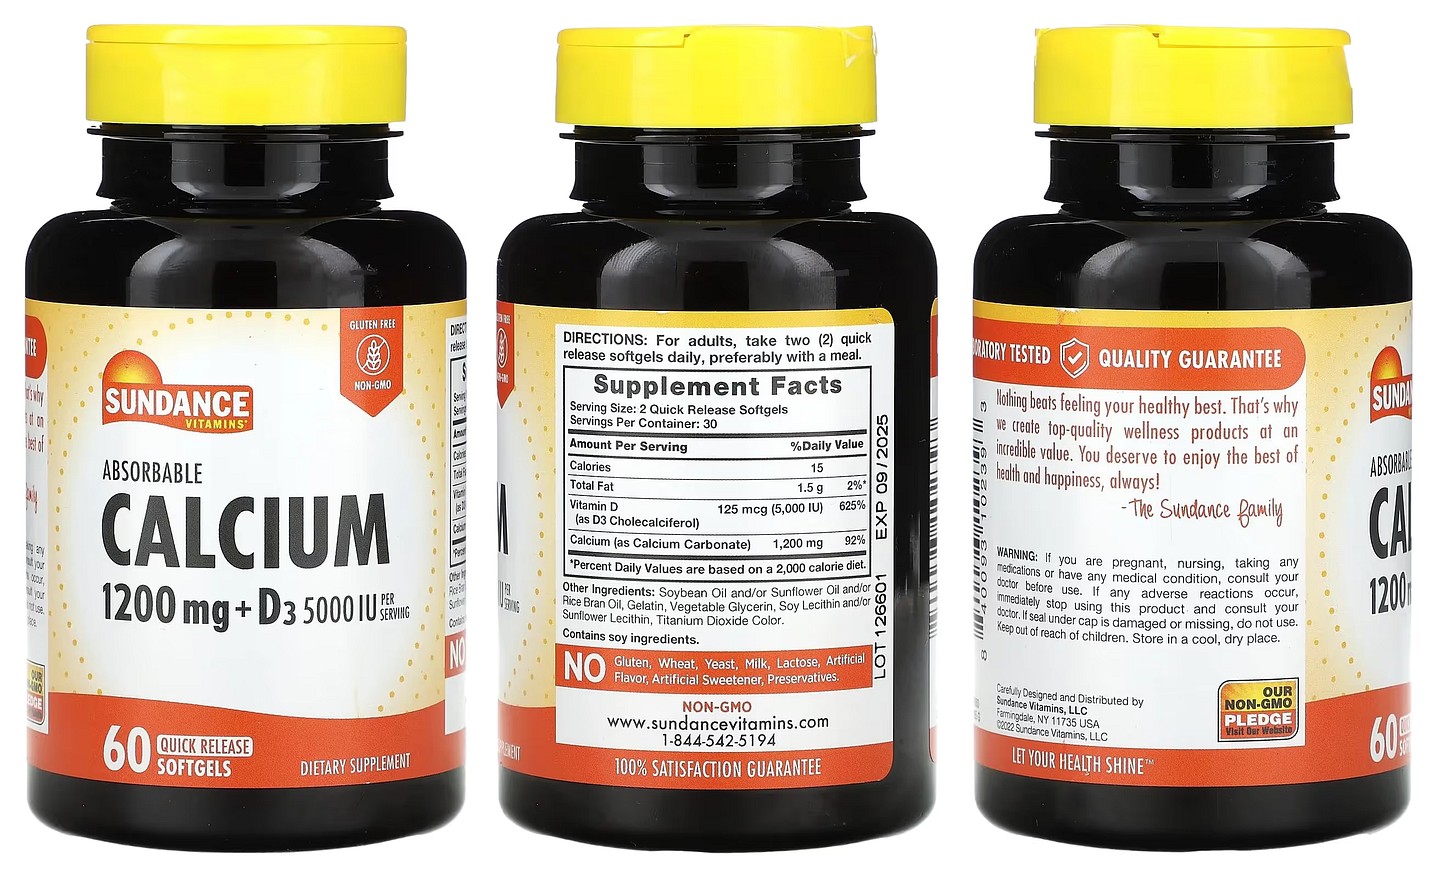 Sundance Vitamins, Absorbable Calcium + D3 packaging